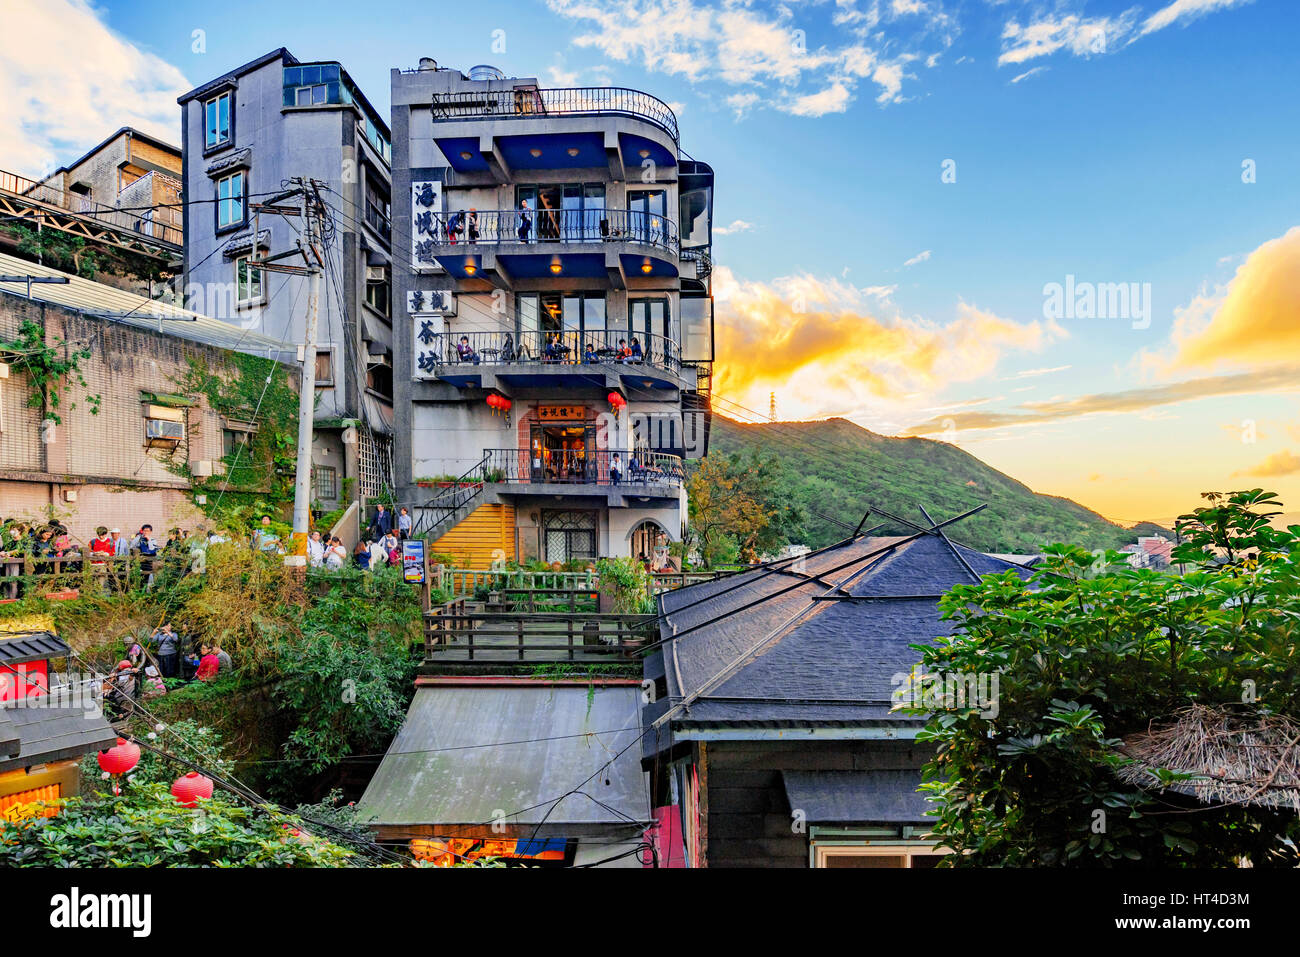 TAIPEI, TAIWAN - DECEMBER 19: This is Jiufen village a mountain village in Taipei which is famous for teahouses on December 19, 2016 in Taipei Stock Photo